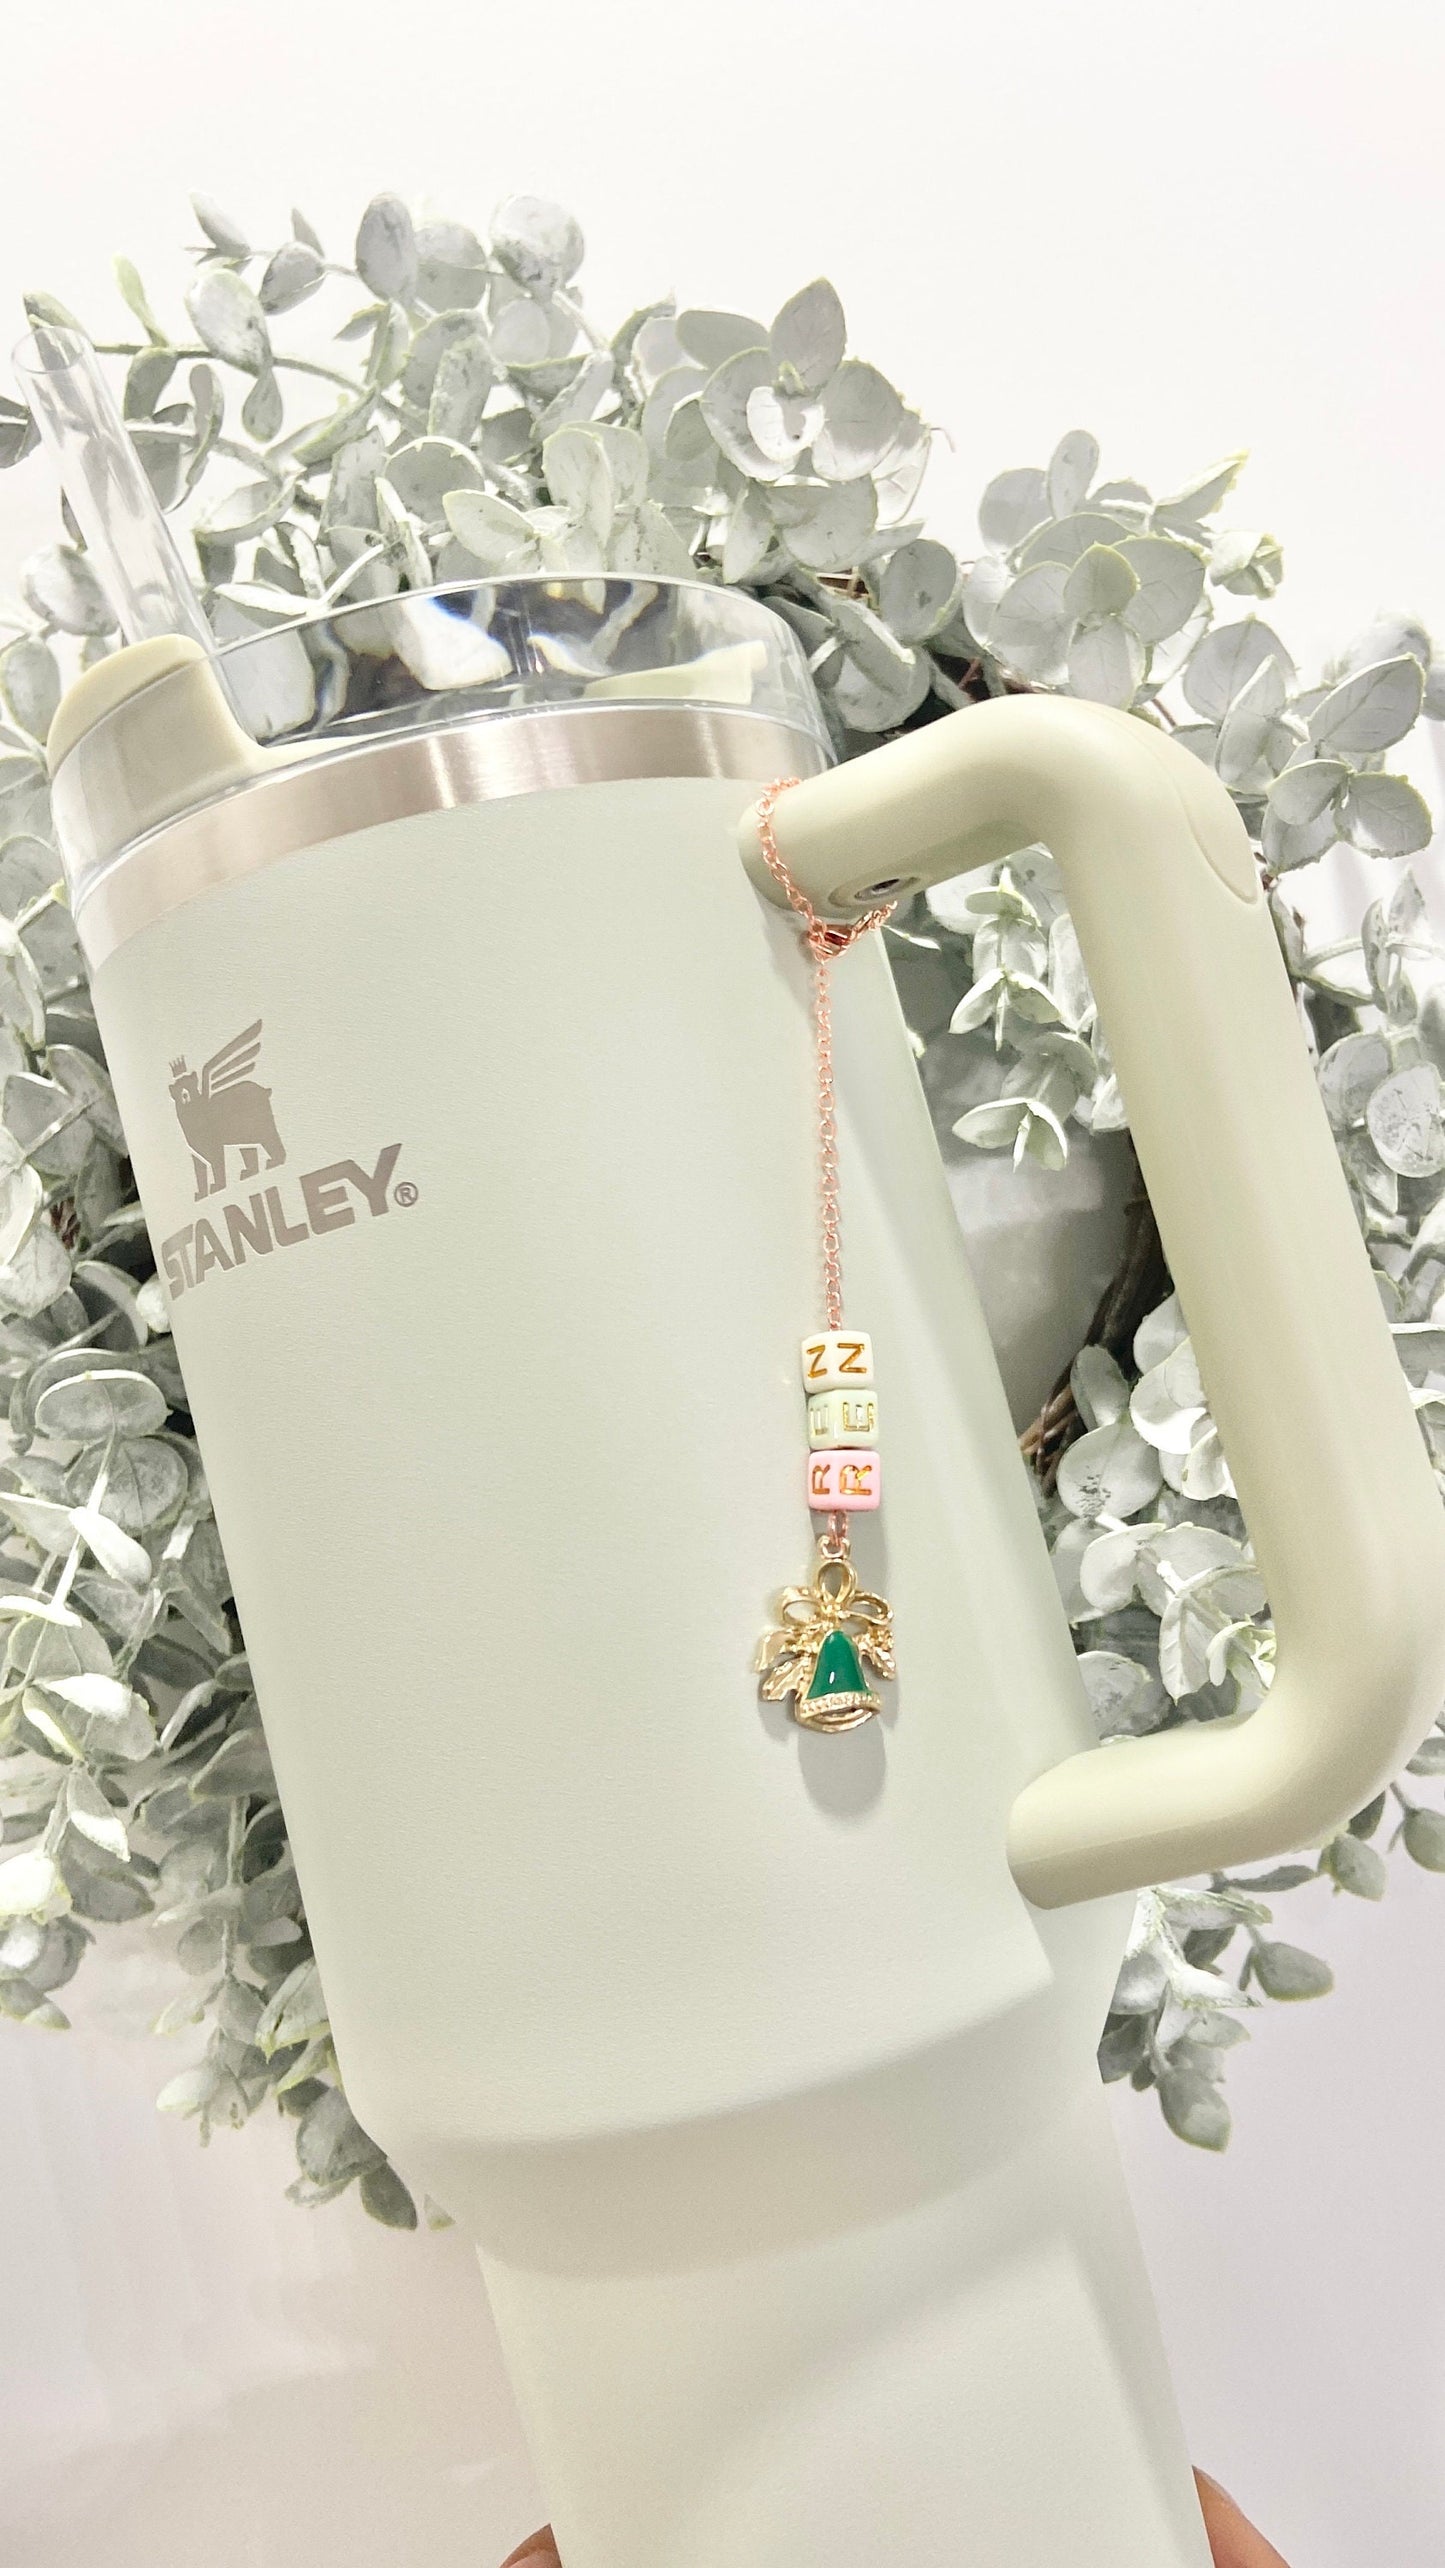 Stanley Cup Charm Stanley Accessory Water Bottle Charm Cup Charm